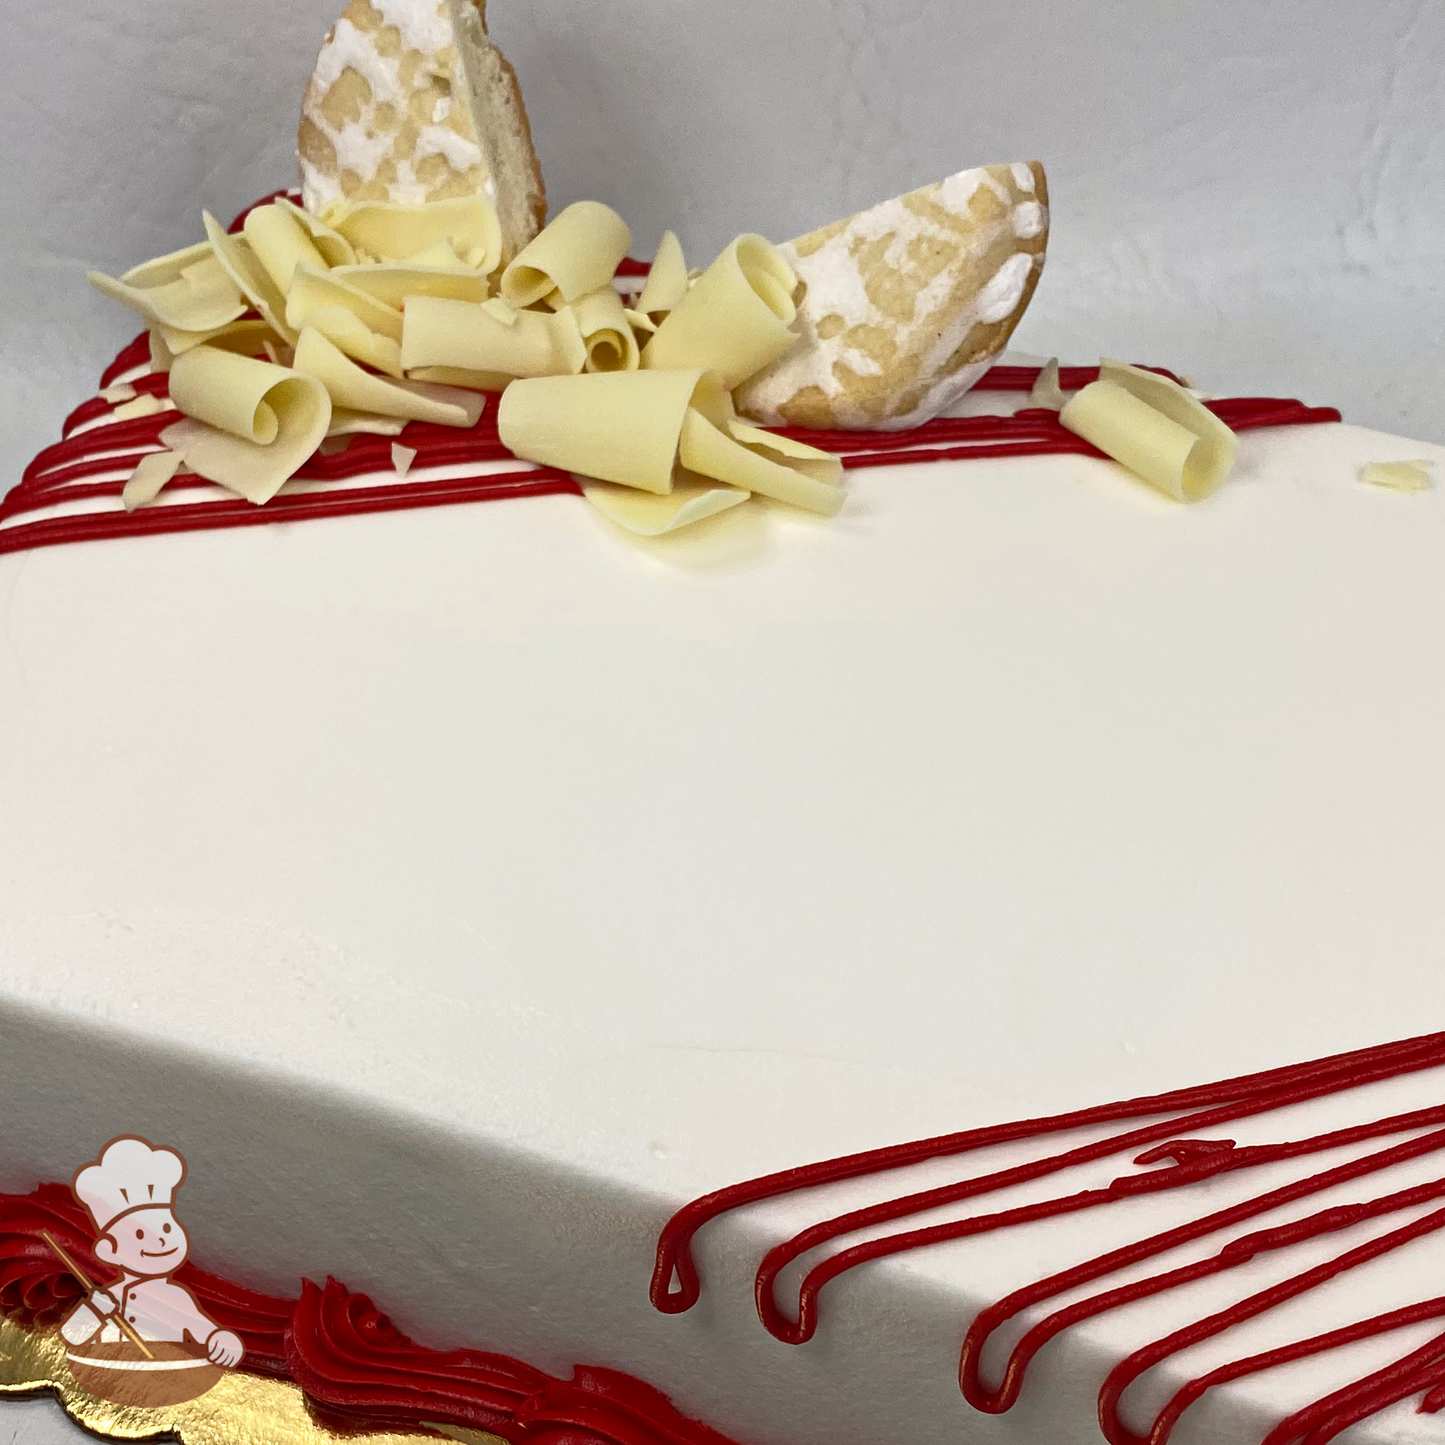 Sheet cake with butter shortbread cookies, whipped cream and white chocolate curls.